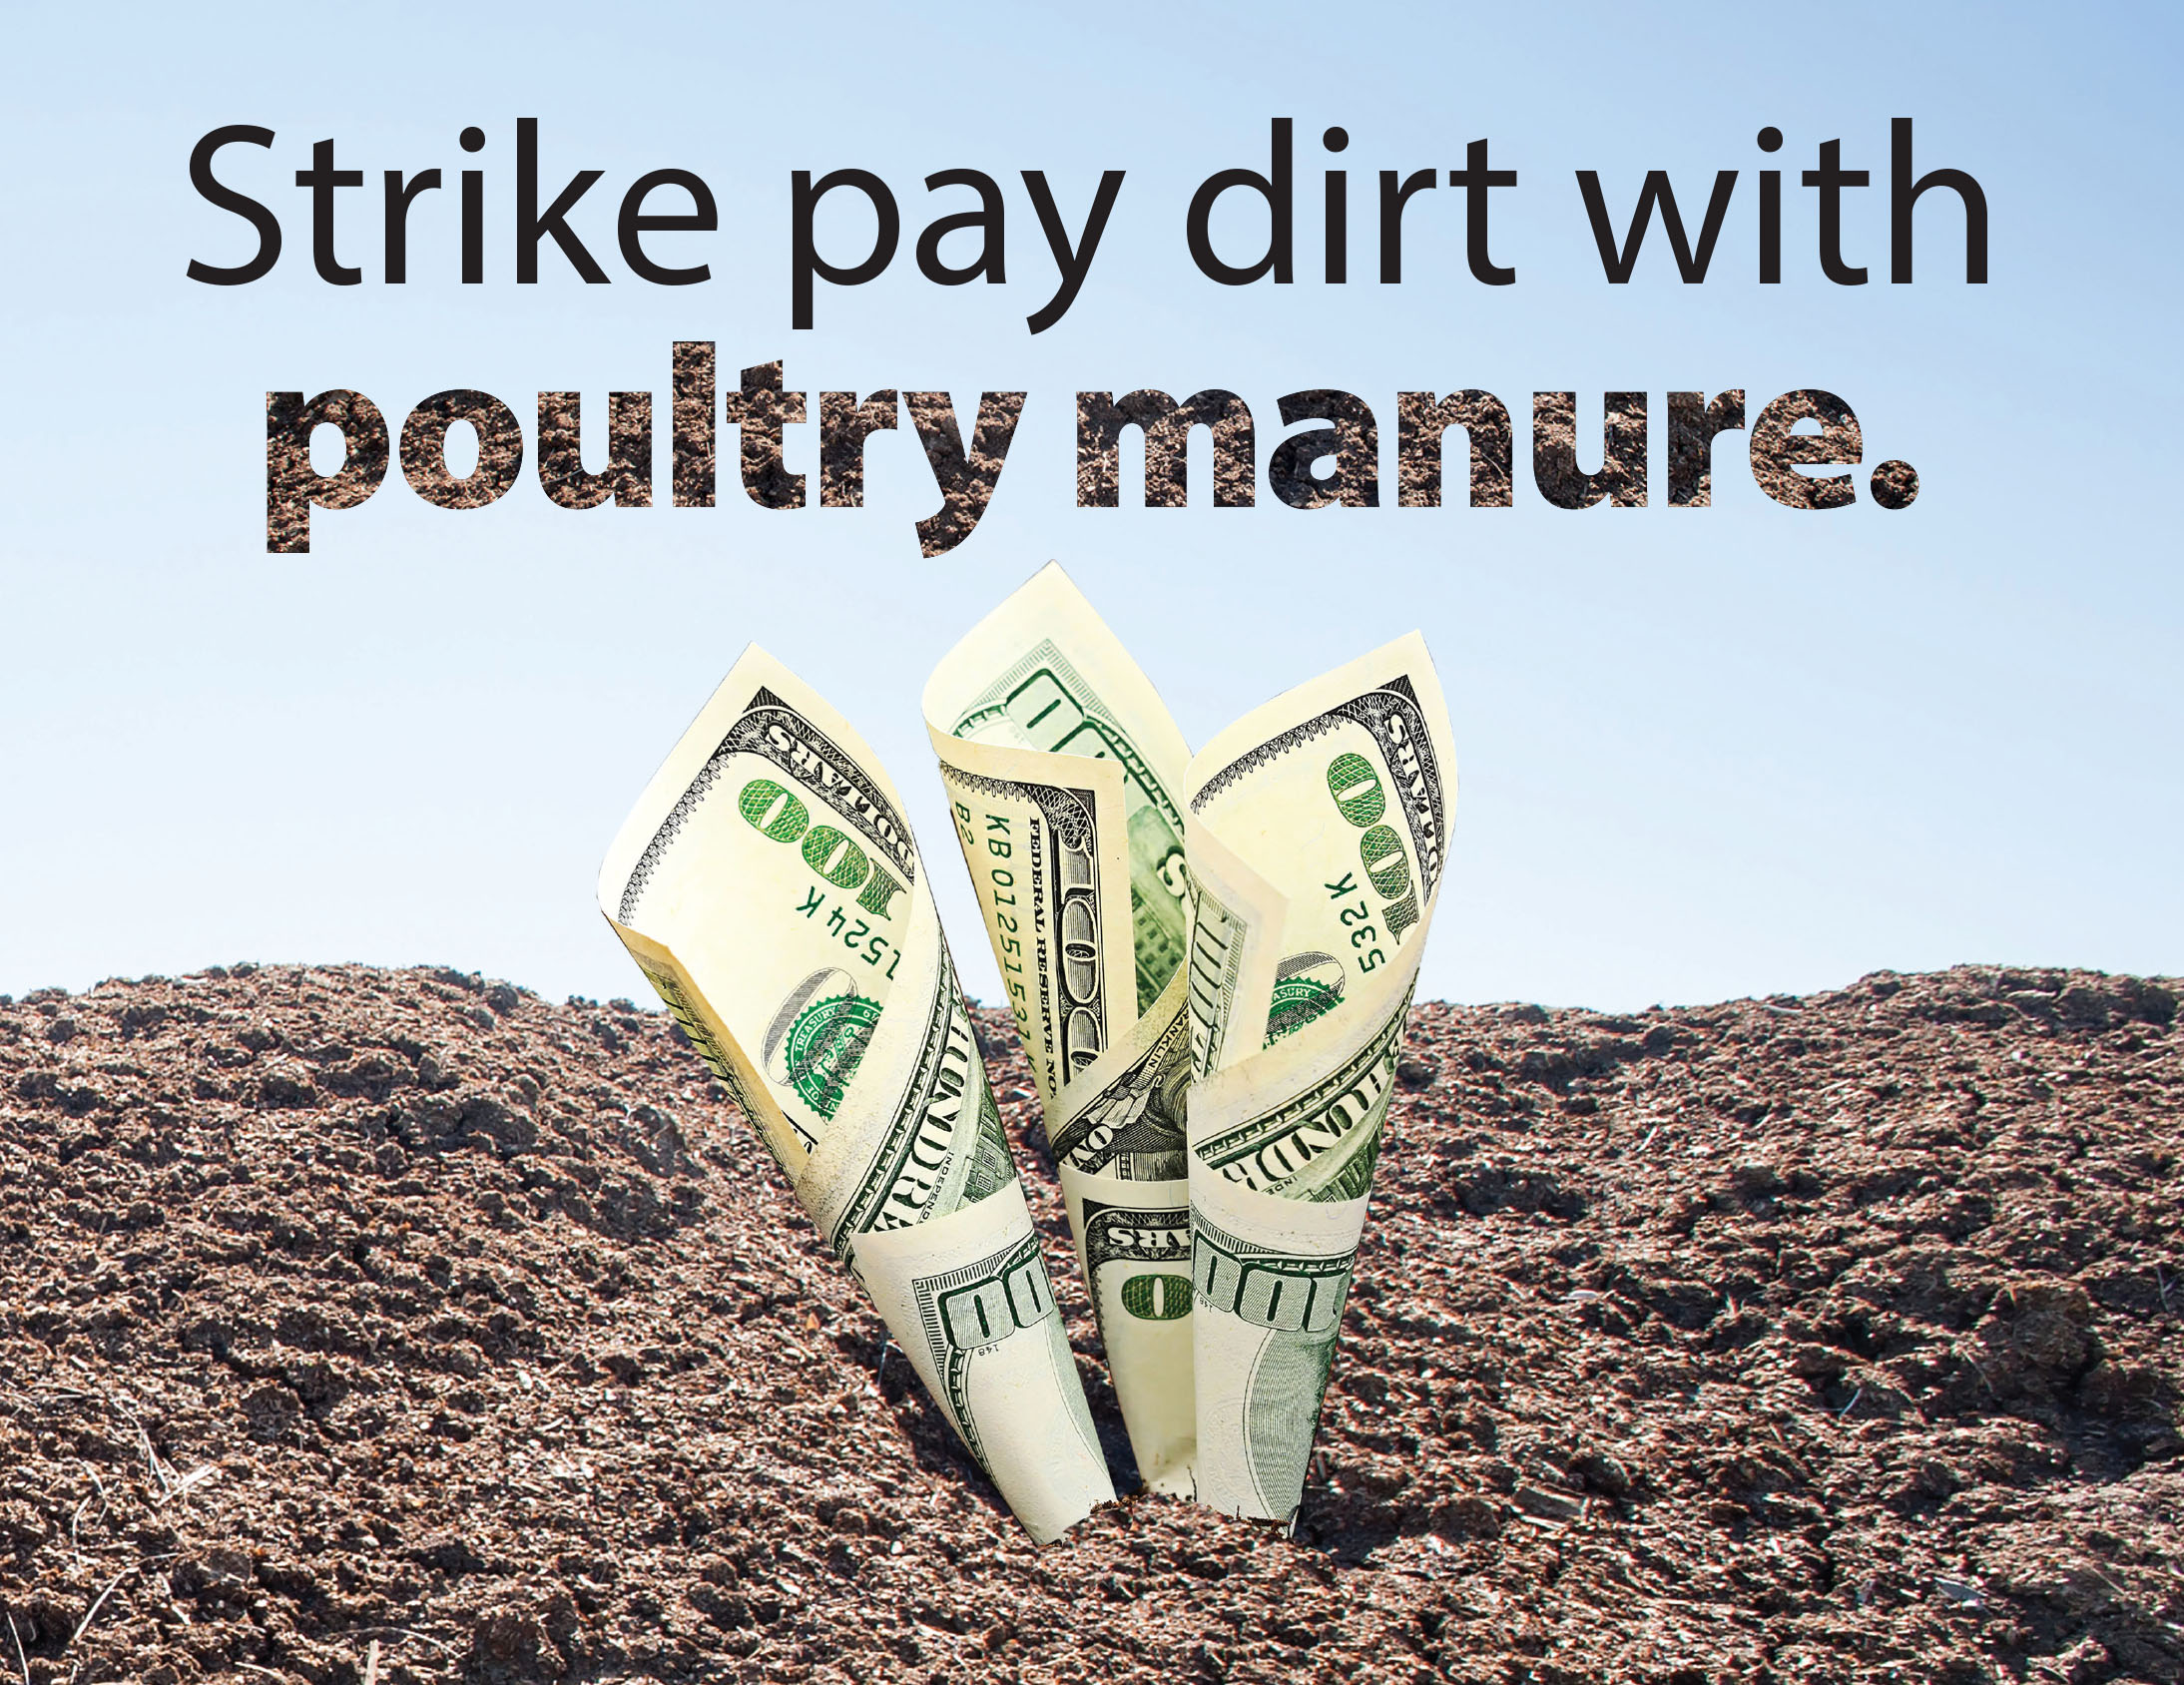 strike pay dirt with manure